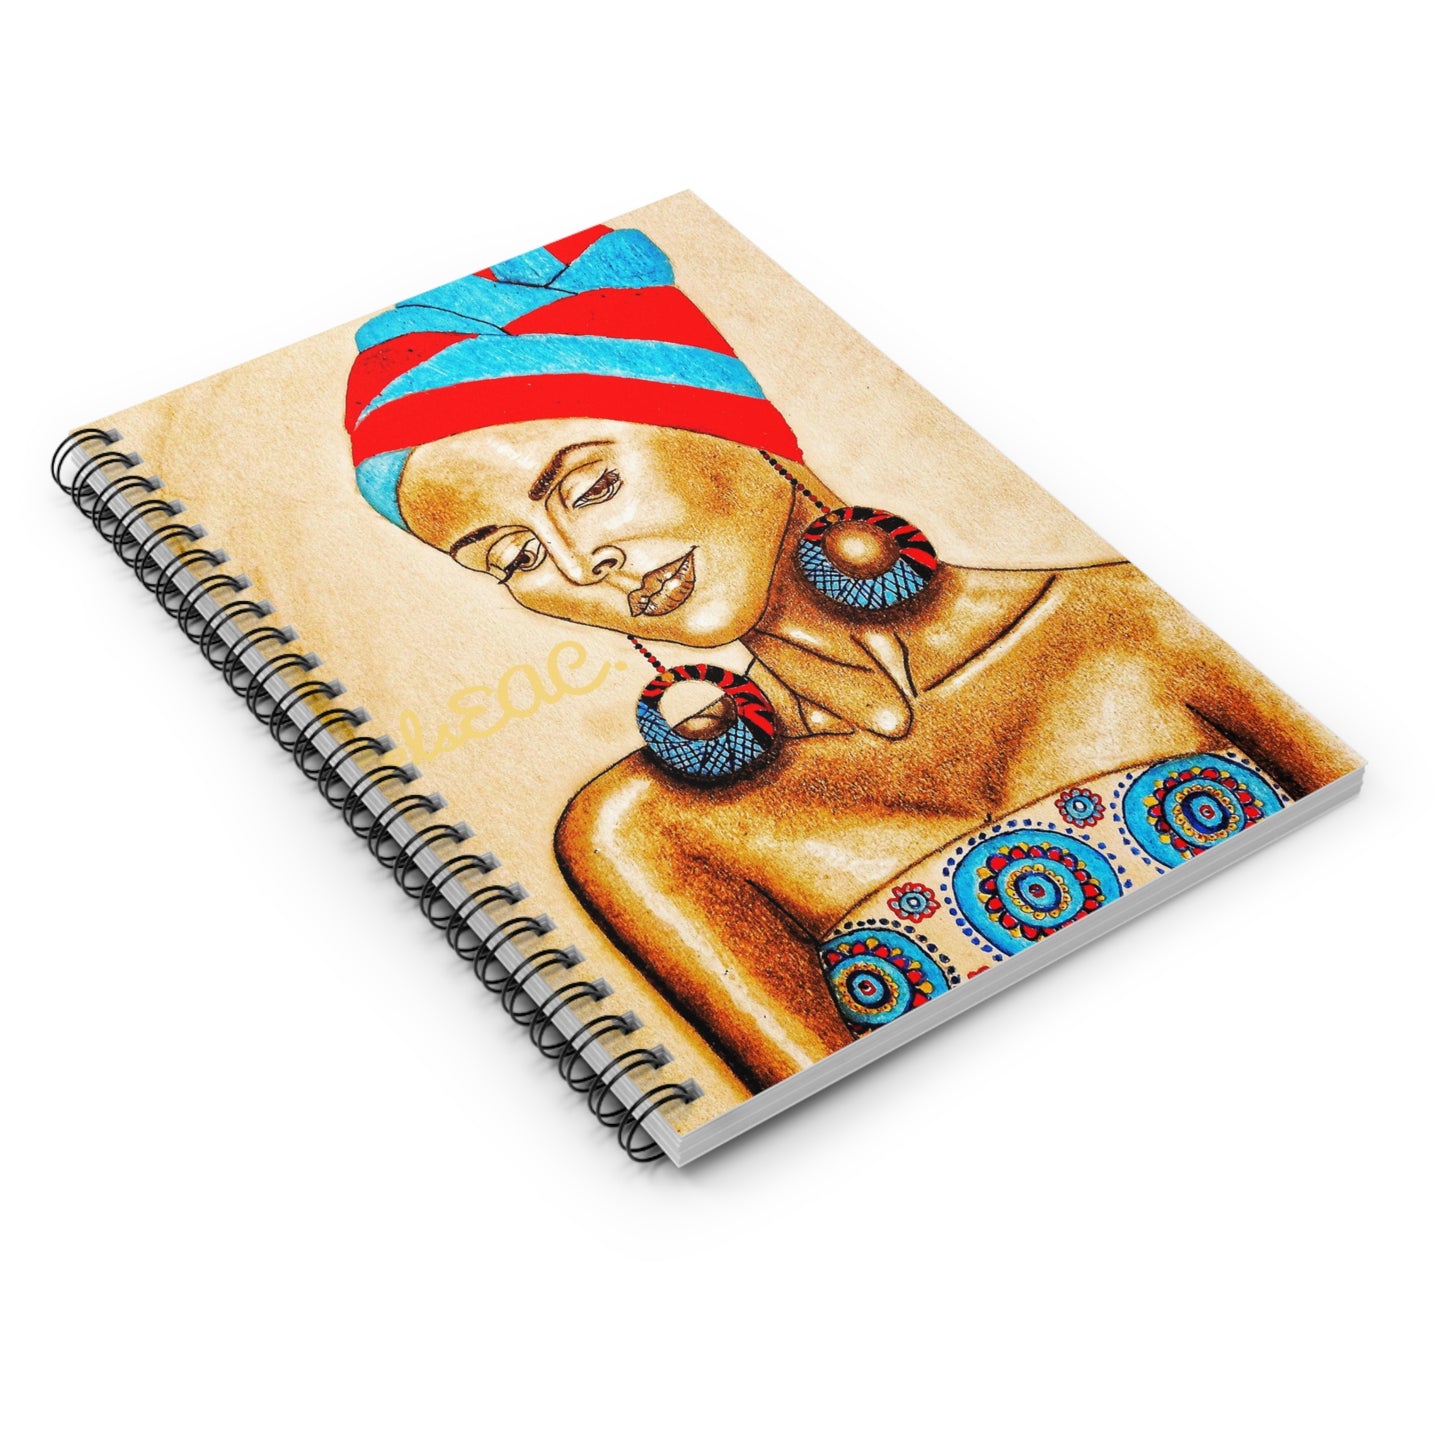 Rust Red Portrait Spiral Notebook - Ruled Line